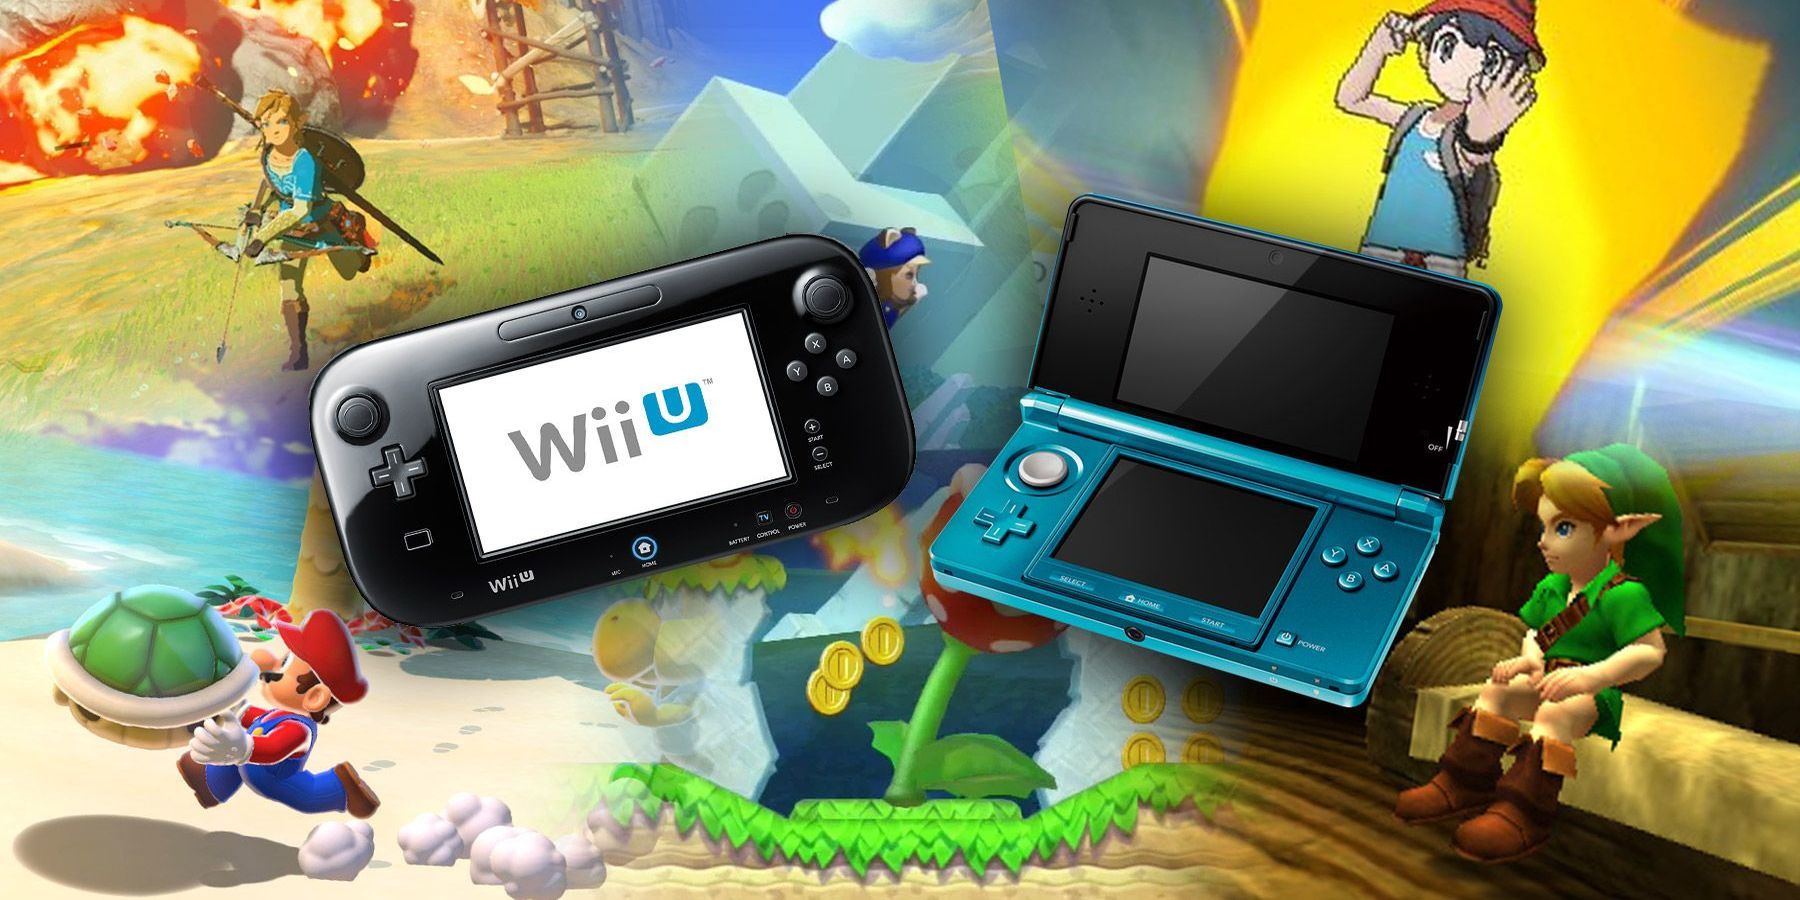 Nintendo's eShop closures are putting generations of games out of